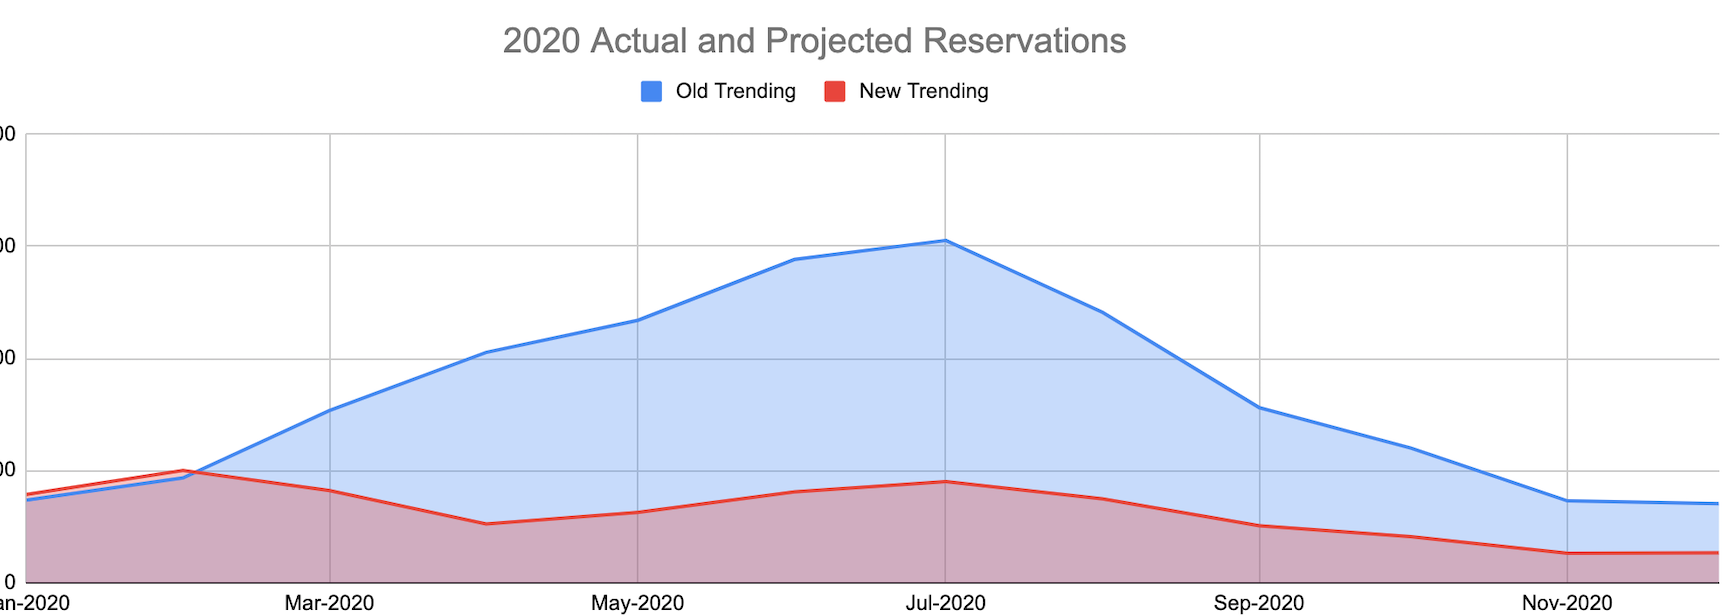 Old & New Reservation Trending